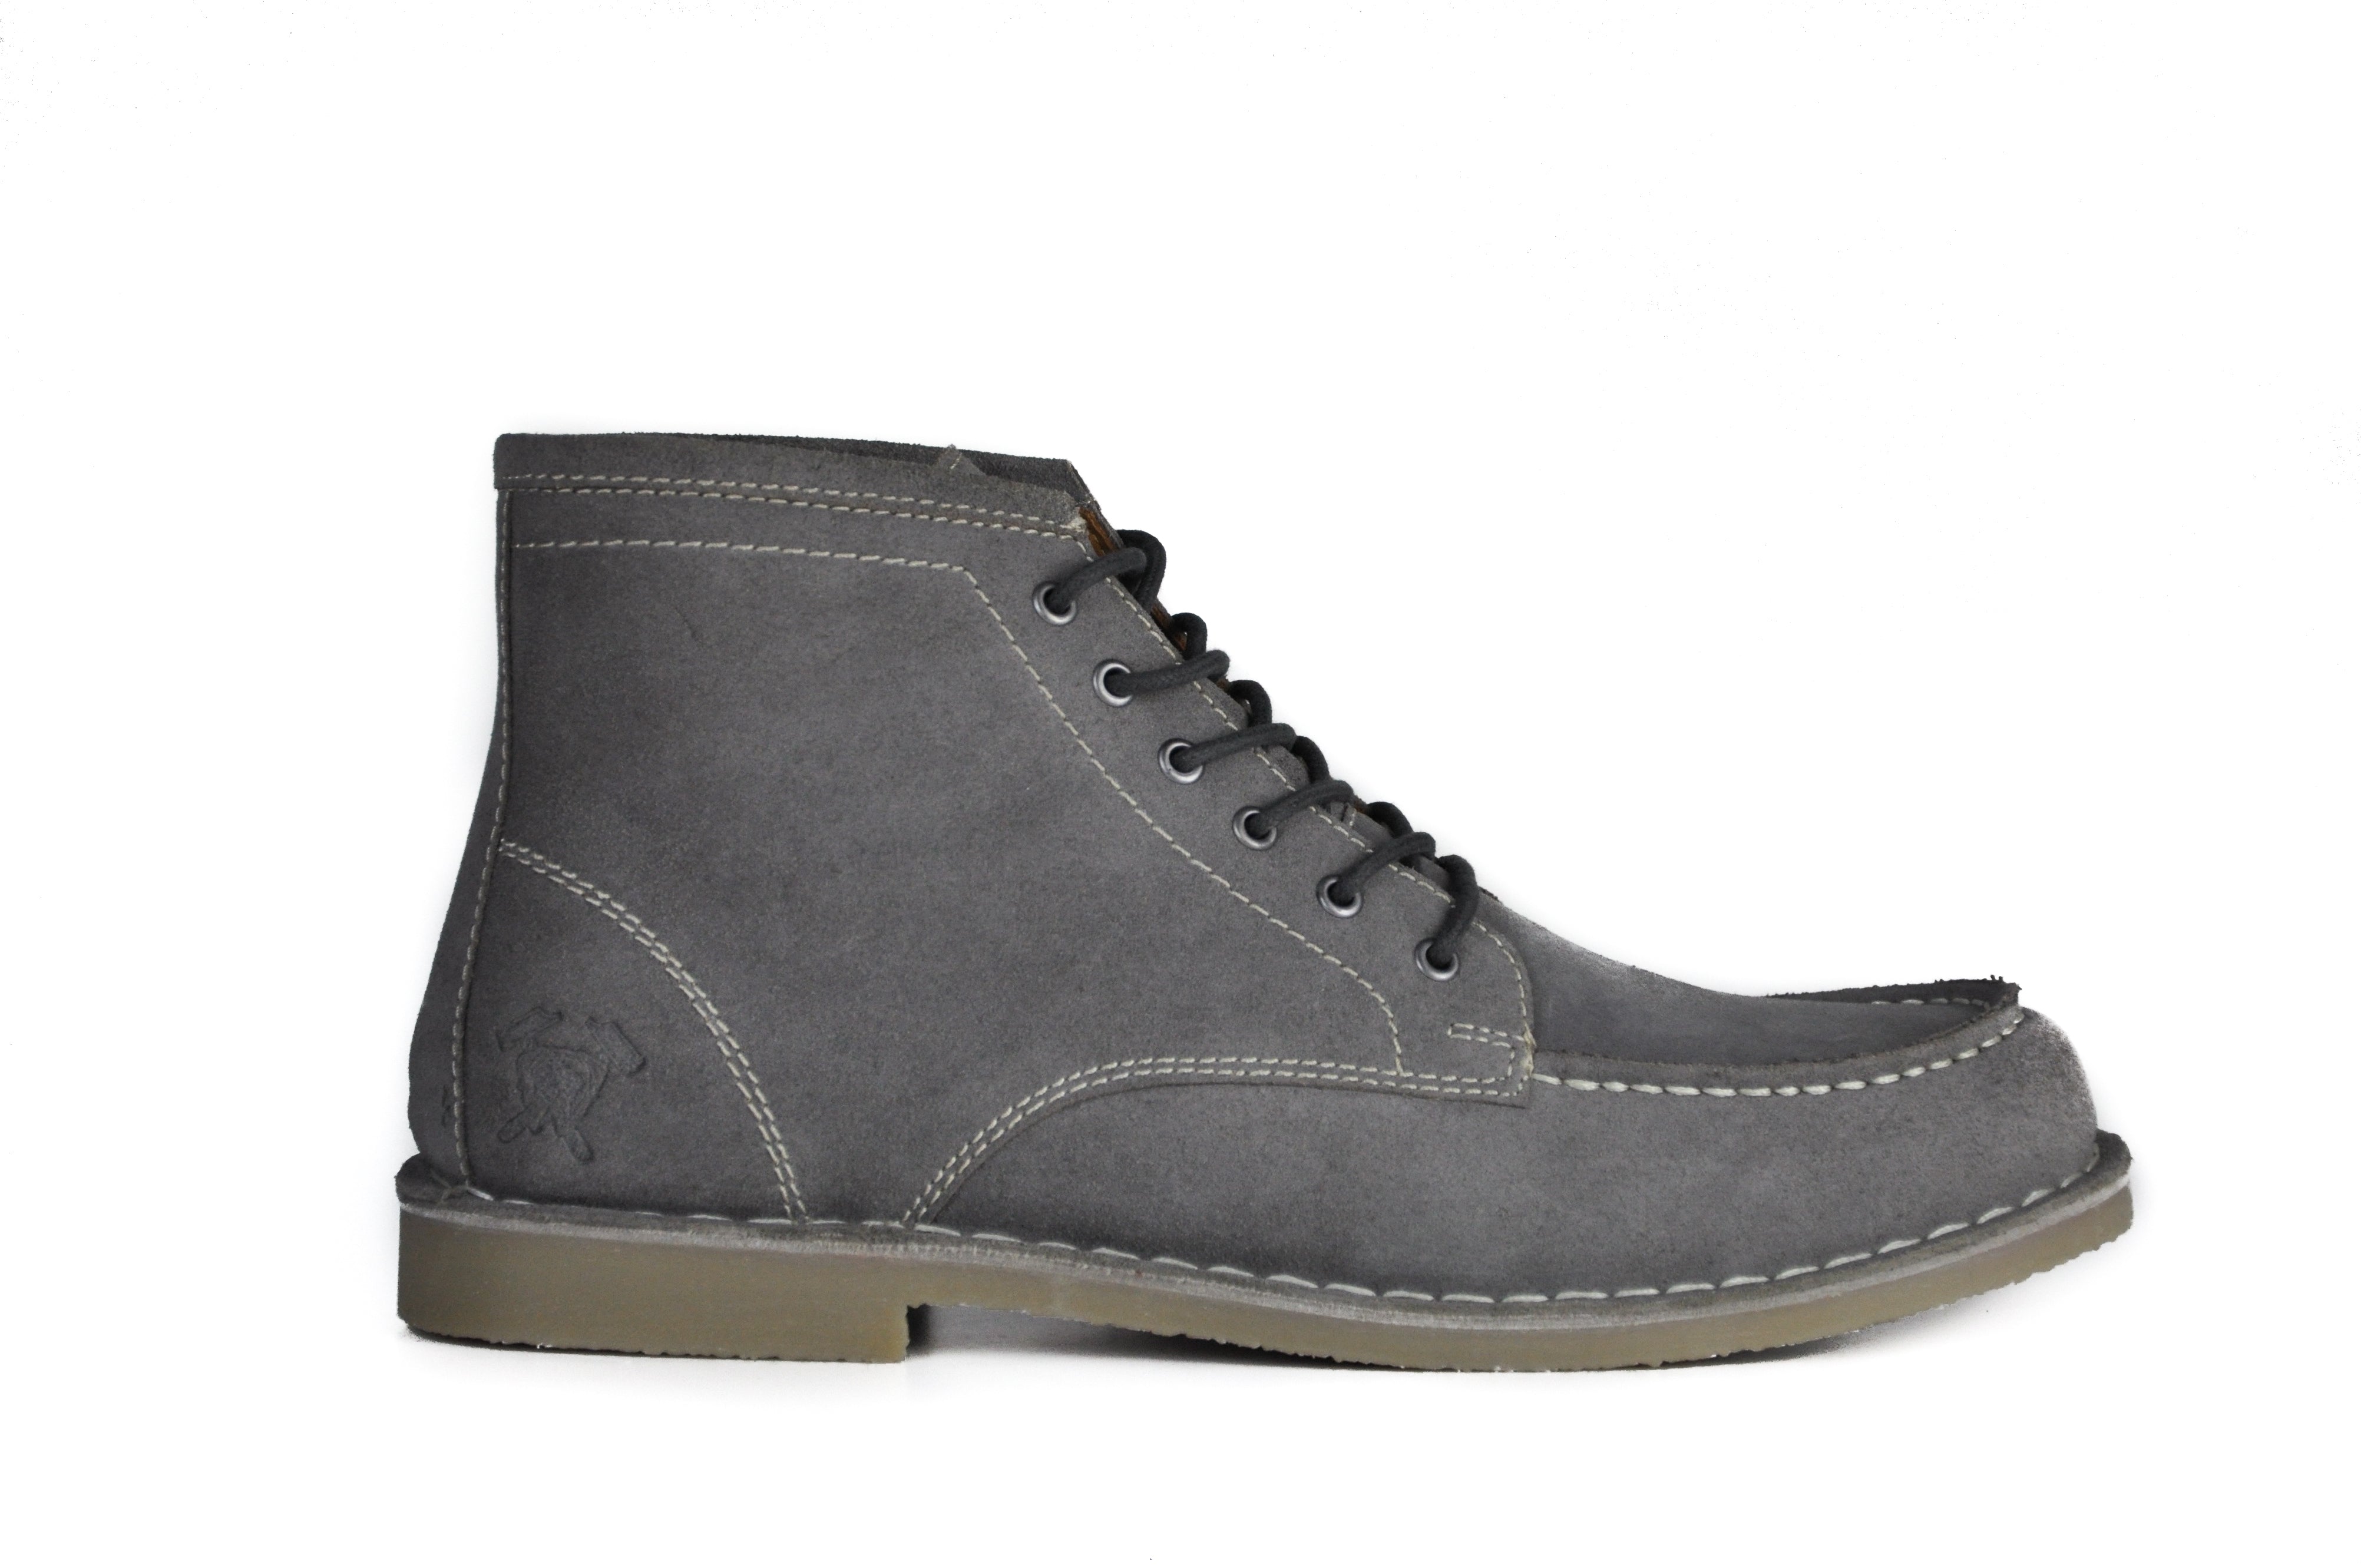 Classic Work Boot - The Cooper | Grey Suede - Hound and Hammer Boots